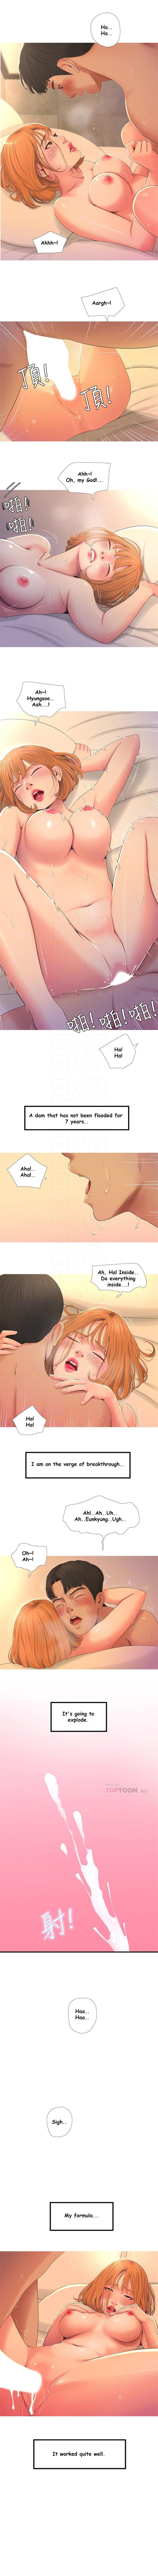 Guys One's In-Laws Virgins Chapter 1-14 (Ongoing) [English] Mmd - Page 13